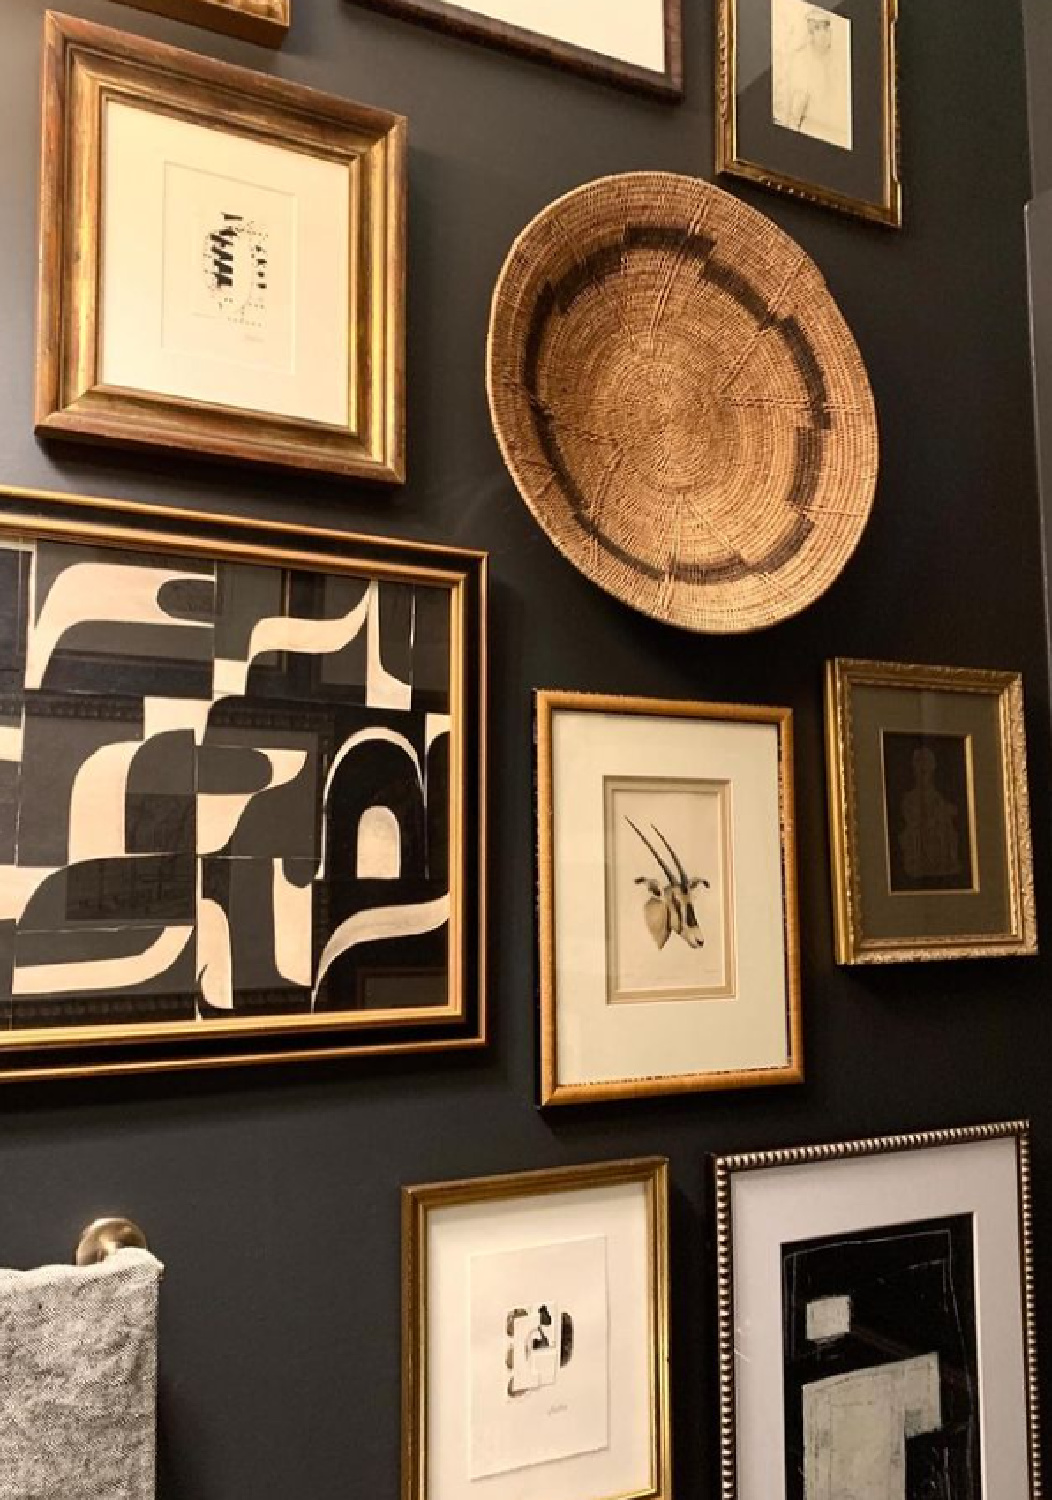 Benjamin Moore Wrought Iron black paint color on gallery wall in powder room designed by Sherry Hart - @sherryhdesigns. #blackpaintcolors #bmwroughtiron #gallerywalls